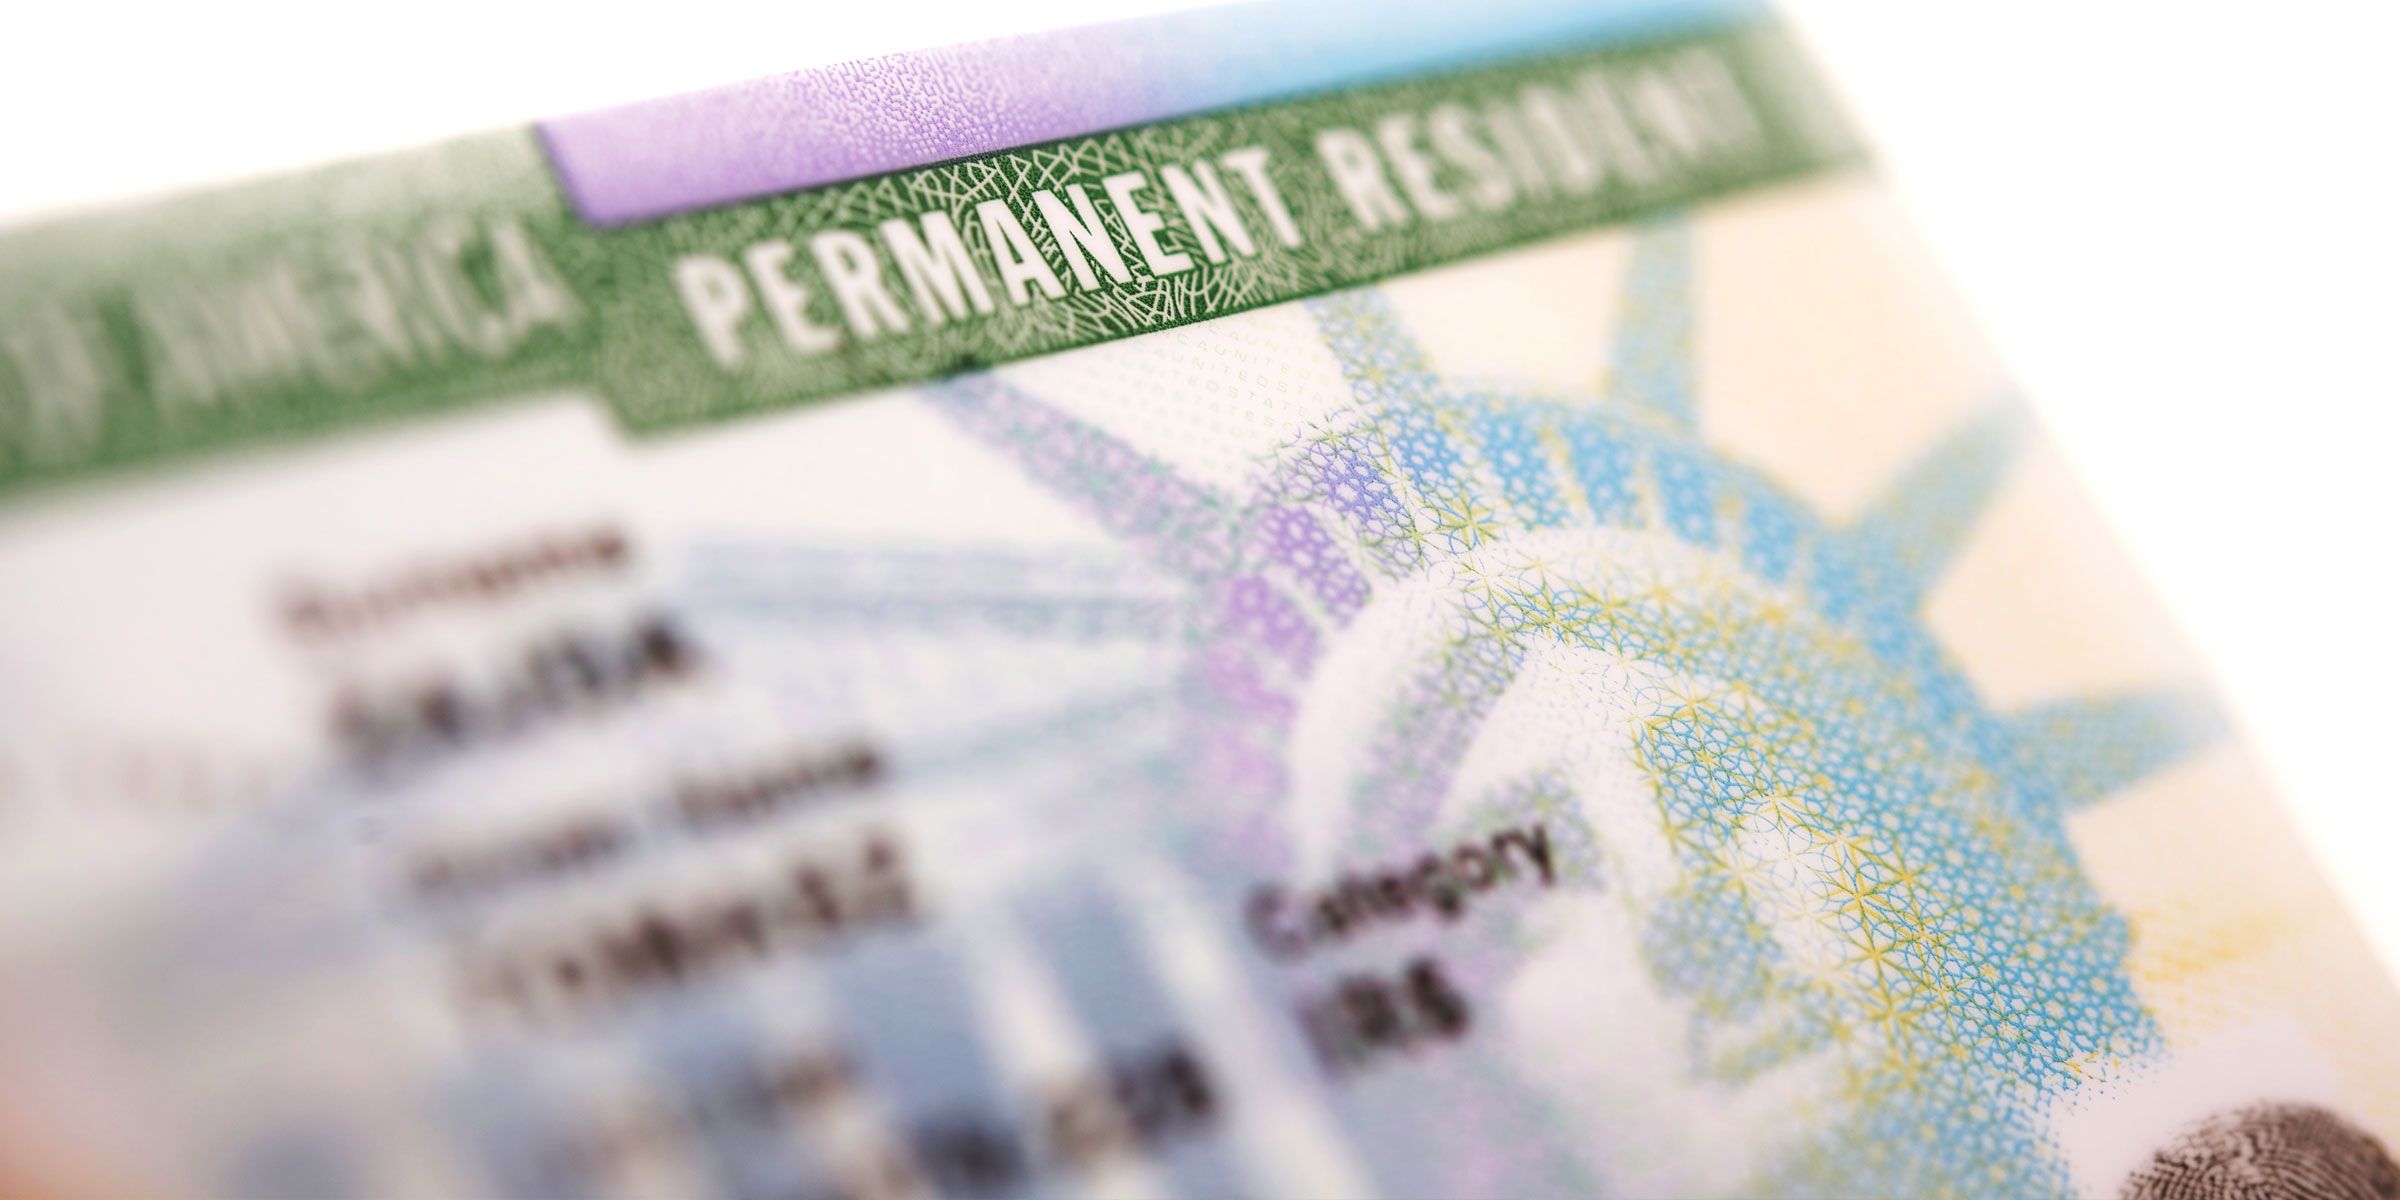 Green Card Process: H-1B to EB-2 and EB-3